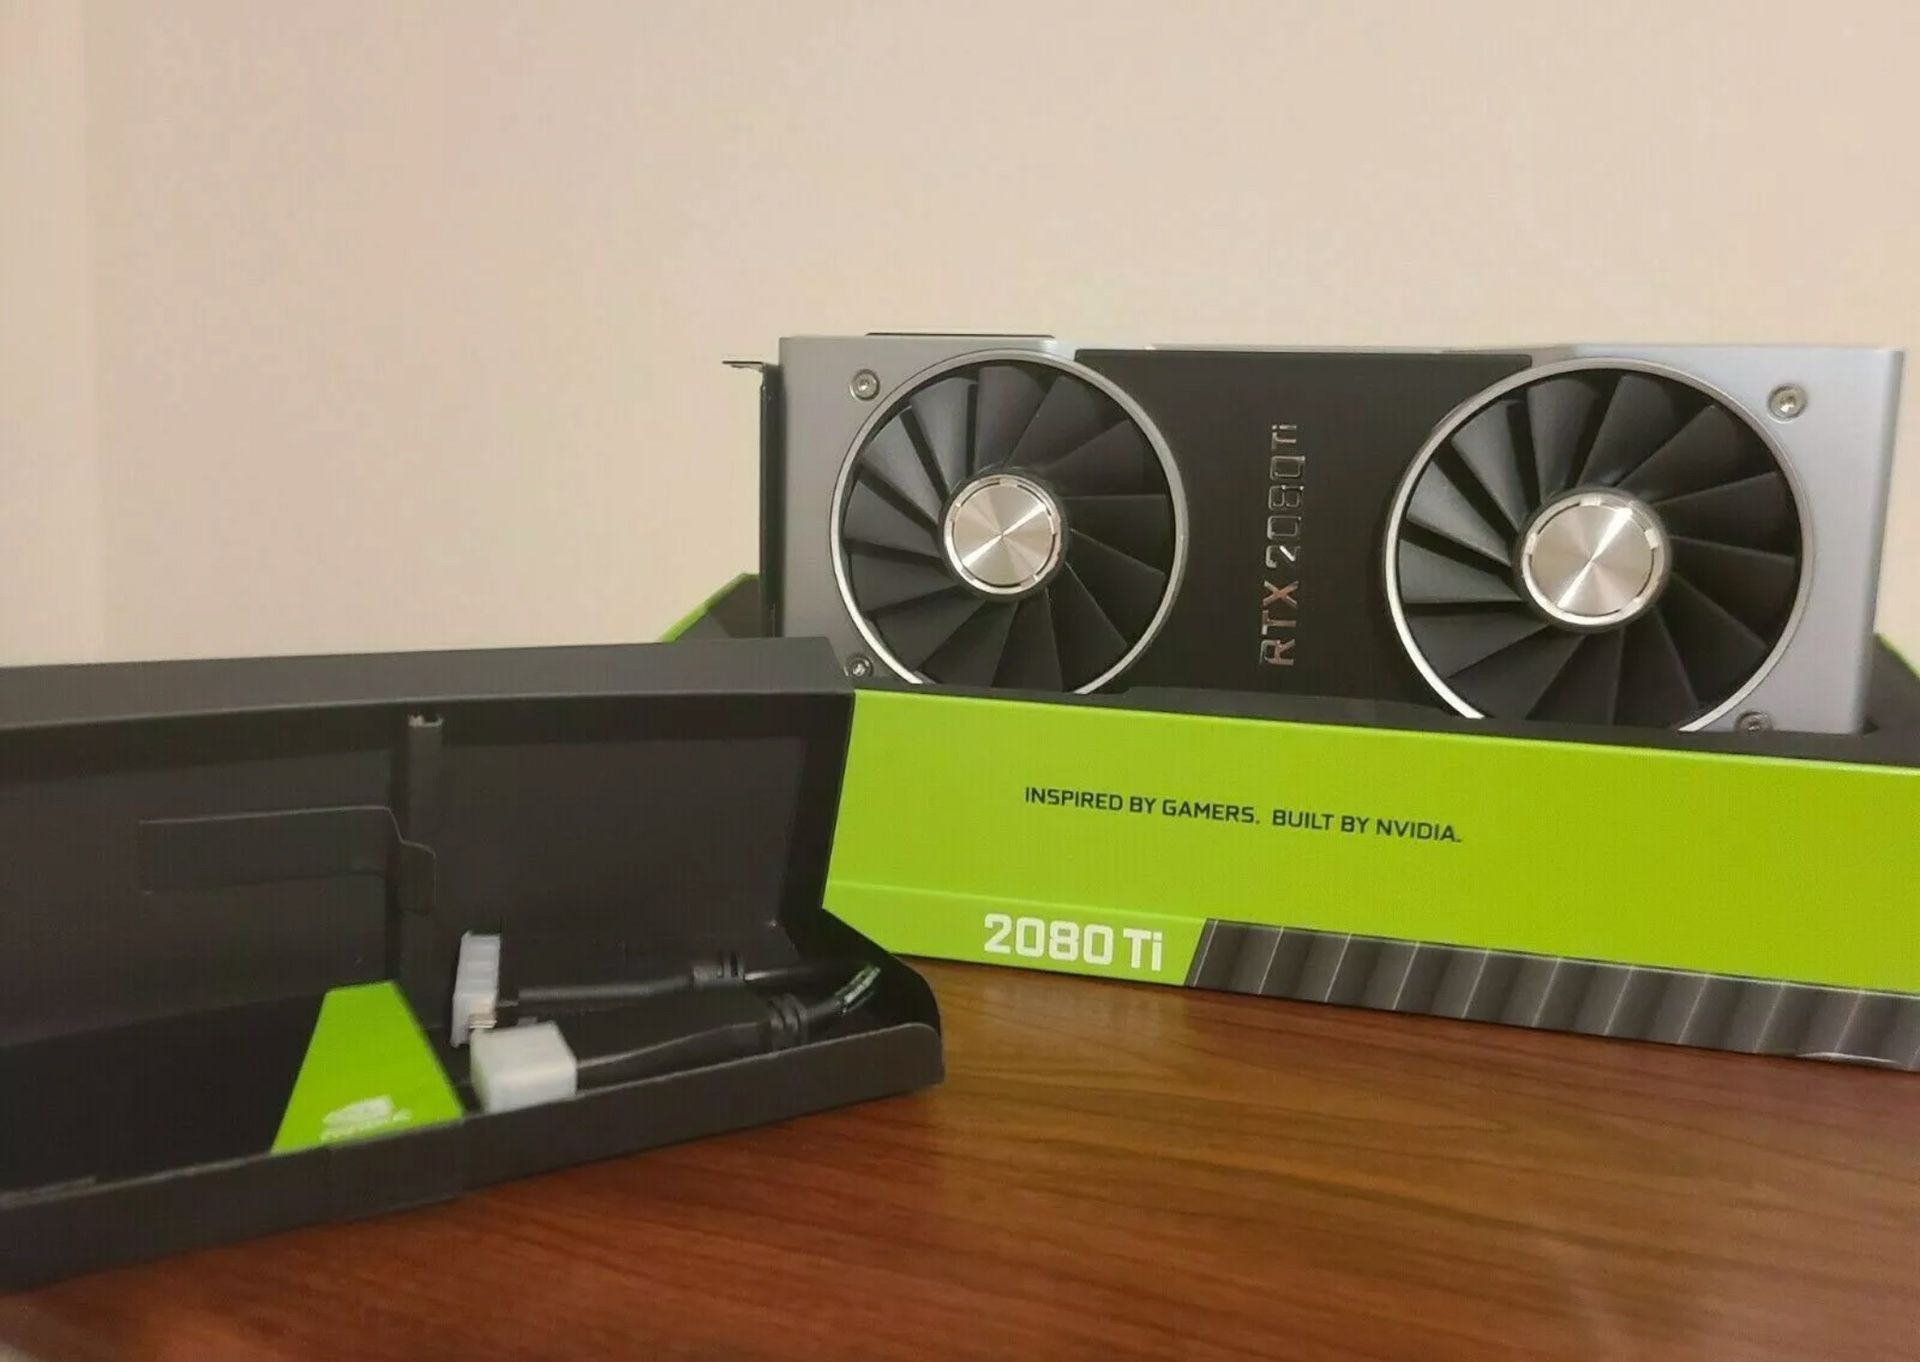 RTX 2080 TI FOUNDERS EDITION